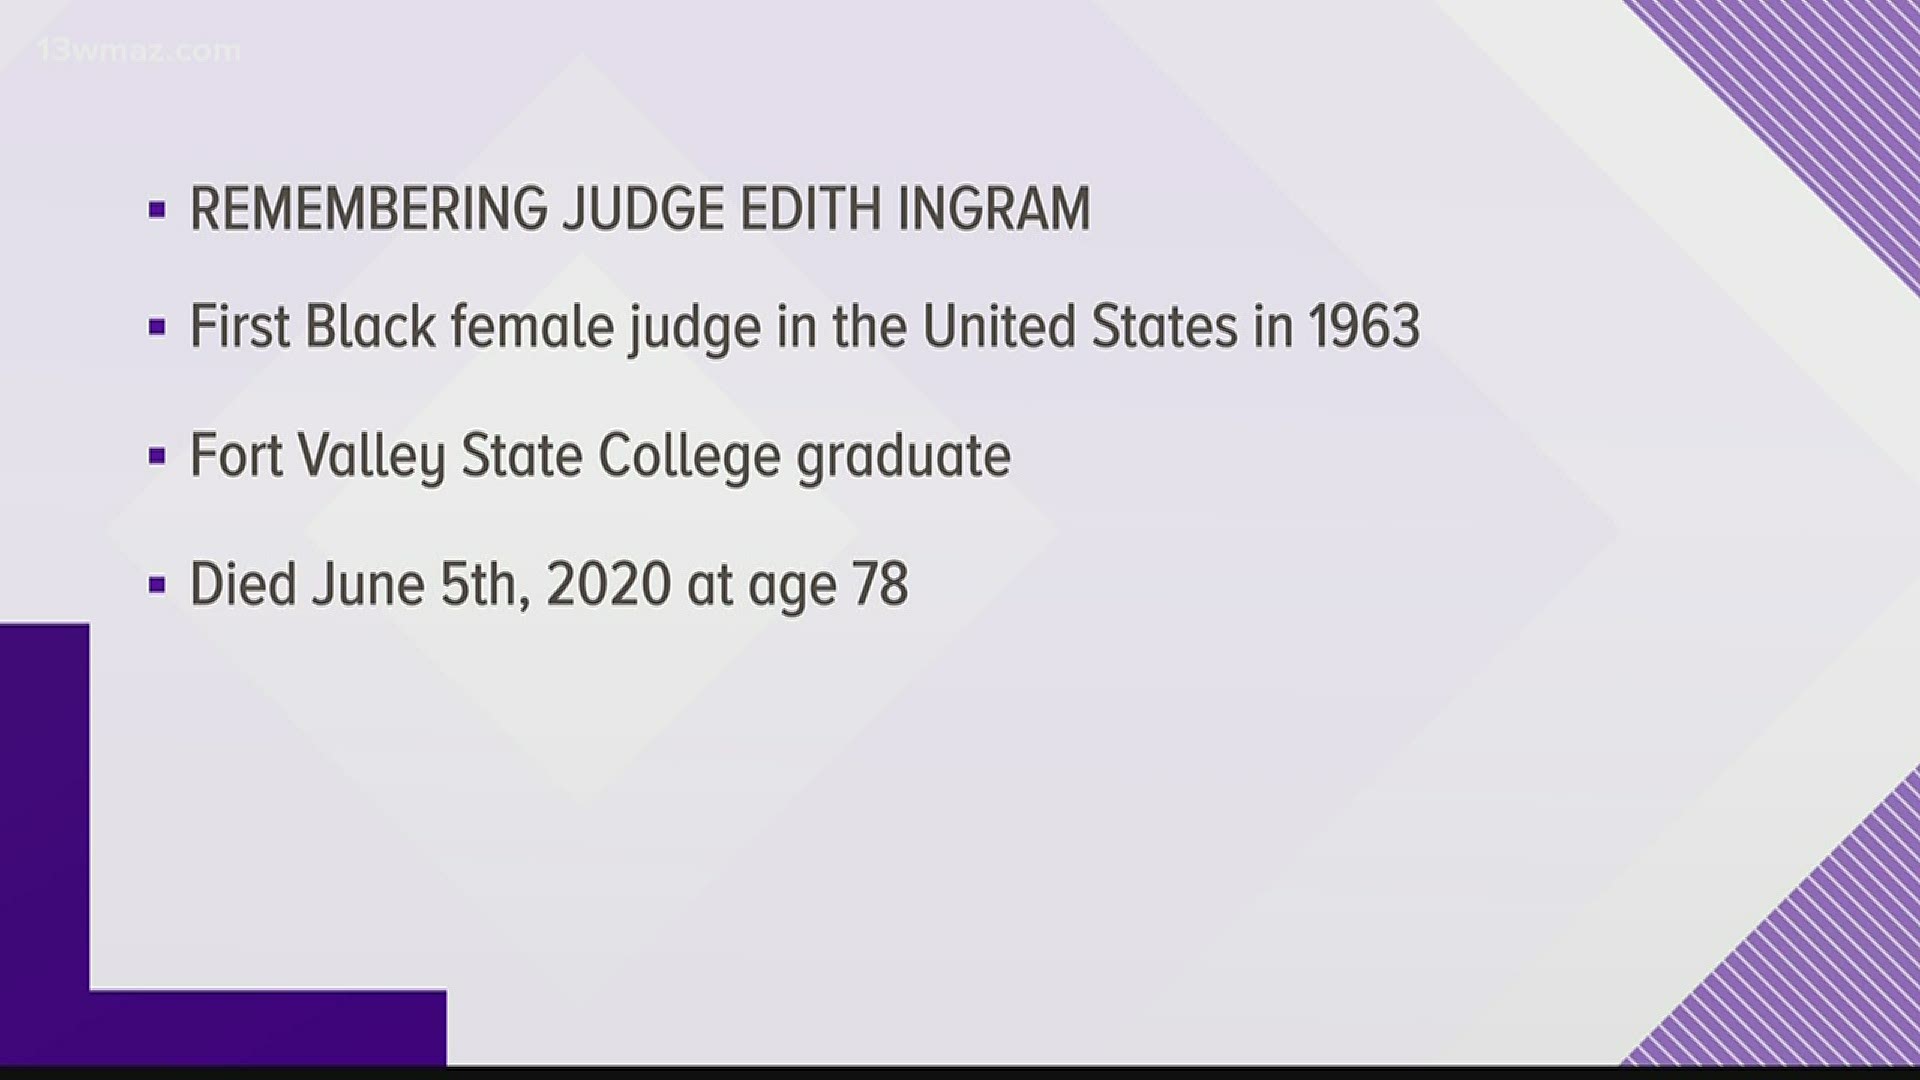 Ingram became the first African-American woman probate judge in the United States in 1969 when she was elected to serve on the Hancock County Court of the Ordinary.